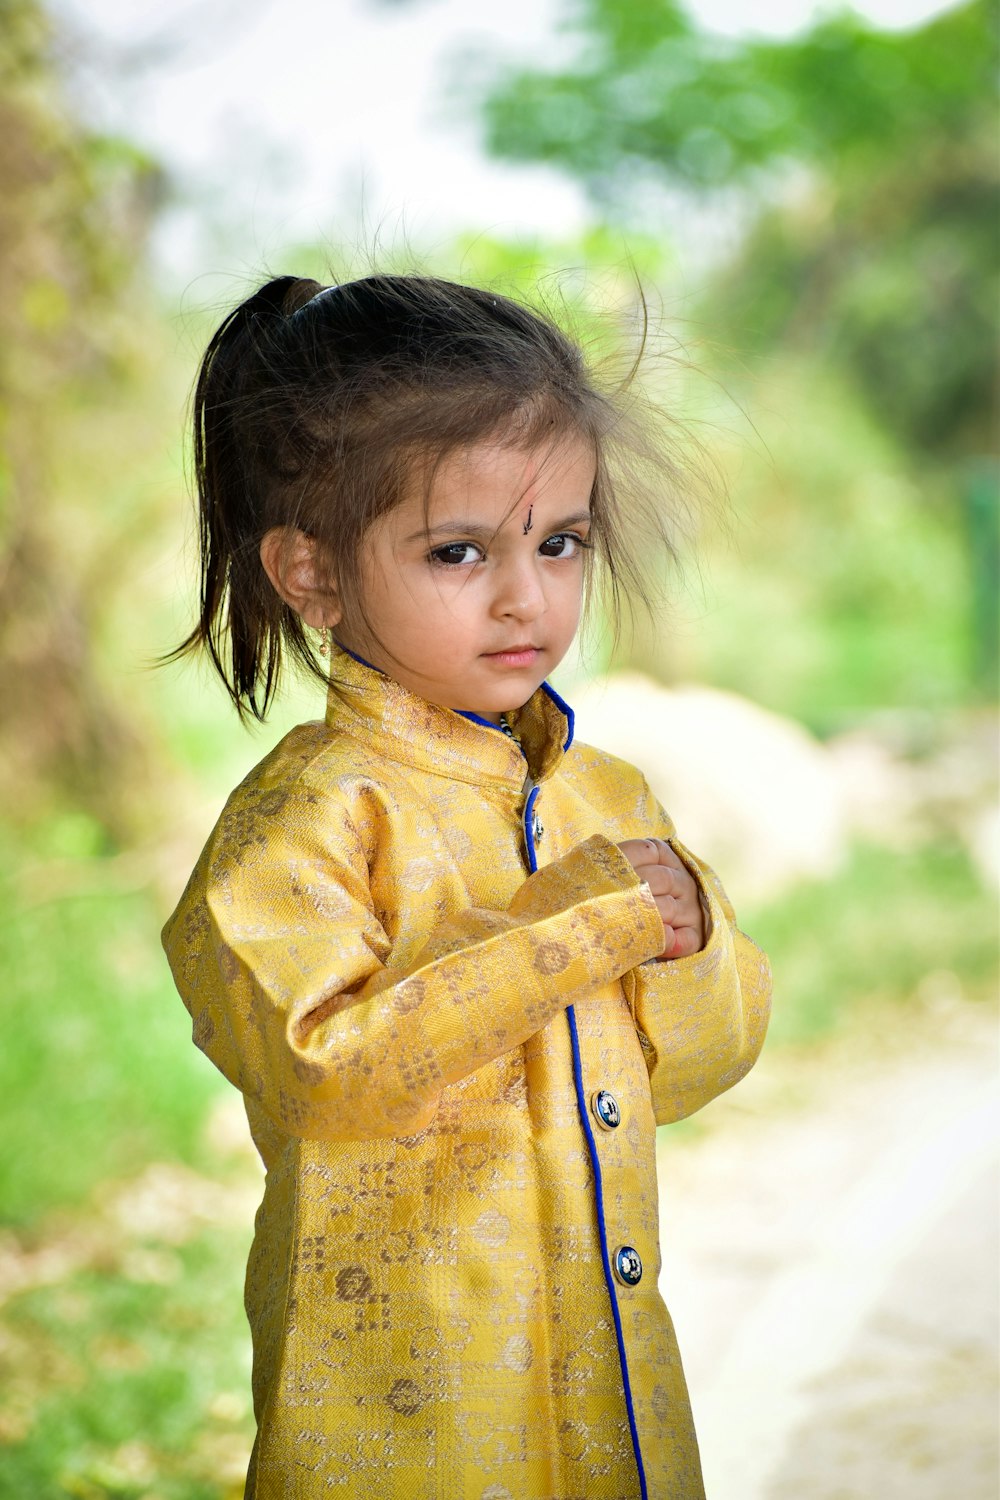 a little girl in a yellow jacket standing on a dirt road